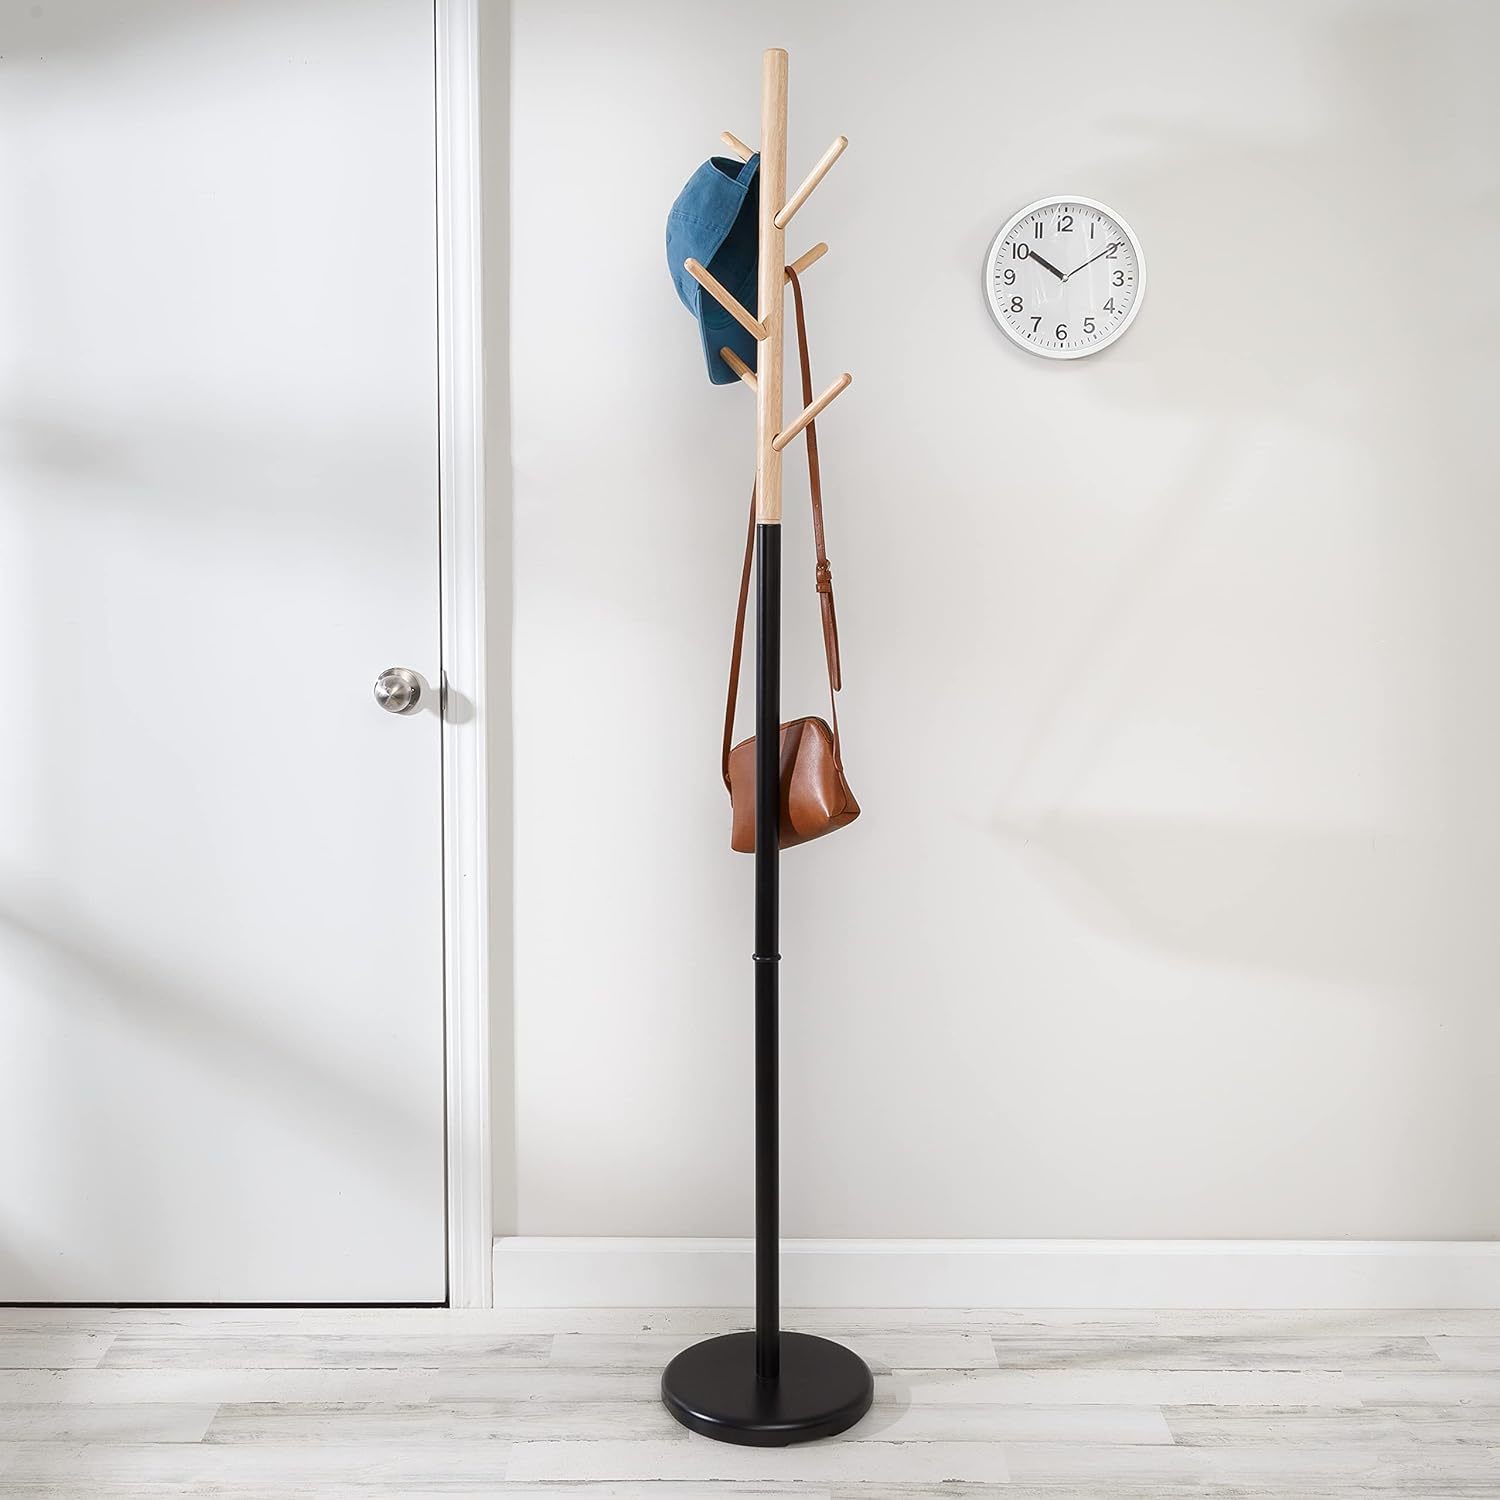 Honey-Can-Do Modern Freestanding Coat Tree Stand With Round Base,, 09527 Natural - $40.98